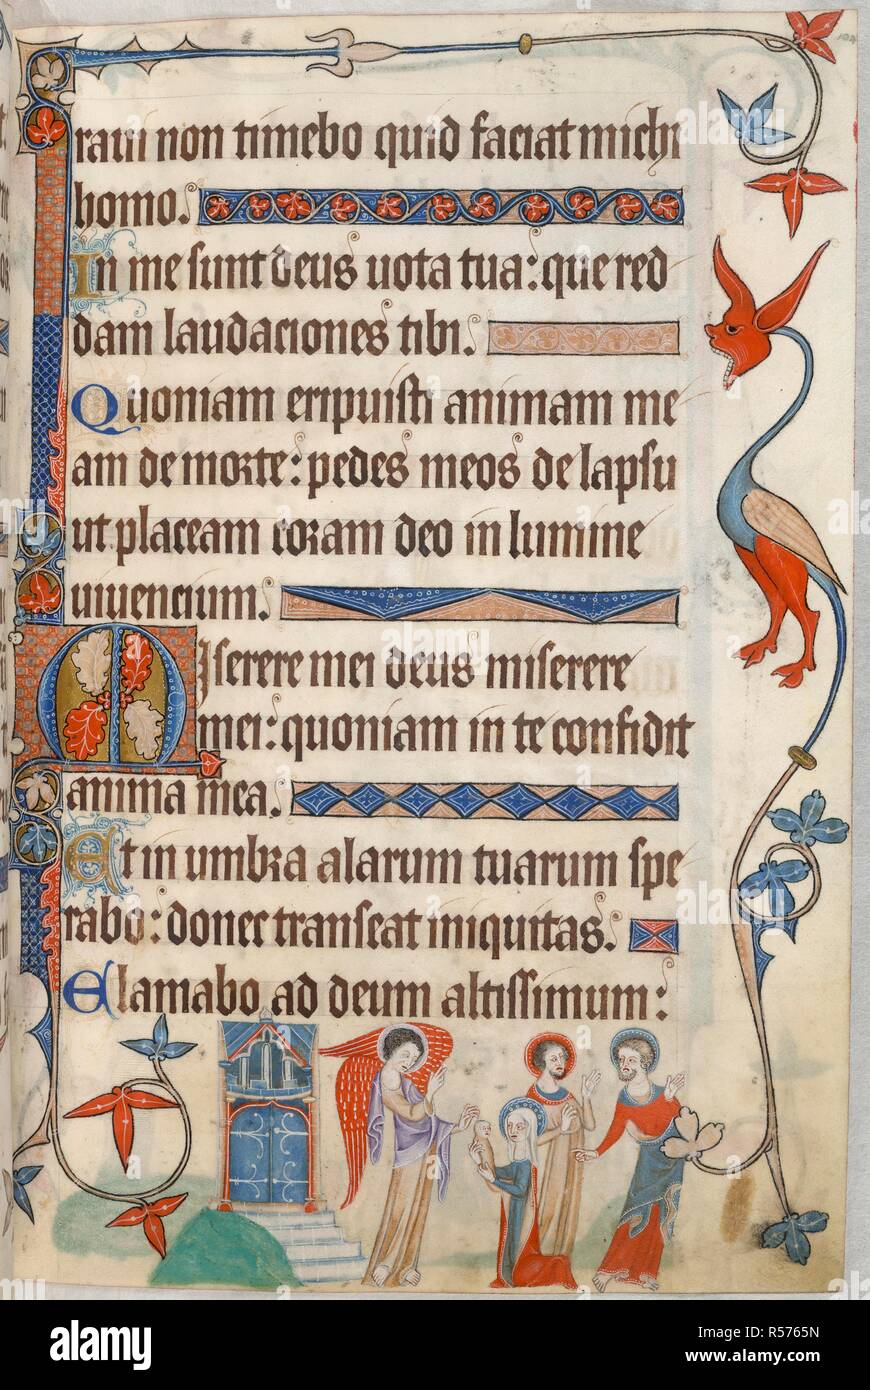 Miracle of the unchaste abbess. Luttrell Psalter. England [East Anglia]; circa 1325-1335. [Whole folio] End of Psalm 55. Psalm 56 beginning with decorated initial 'M'. Border decoration with animal grotesque. In the lower margin, an angel receives an infant from the kneeling Virgin, with two apostles behind her. On left is a building with two doors at the top of some steps. The scene represents an episode in the miracle of the unchaste abbess, whose child was entrusted by the Virgin to an angel, to be handed over to a hermit  Image taken from Luttrell Psalter.  Originally published/produced in Stock Photo